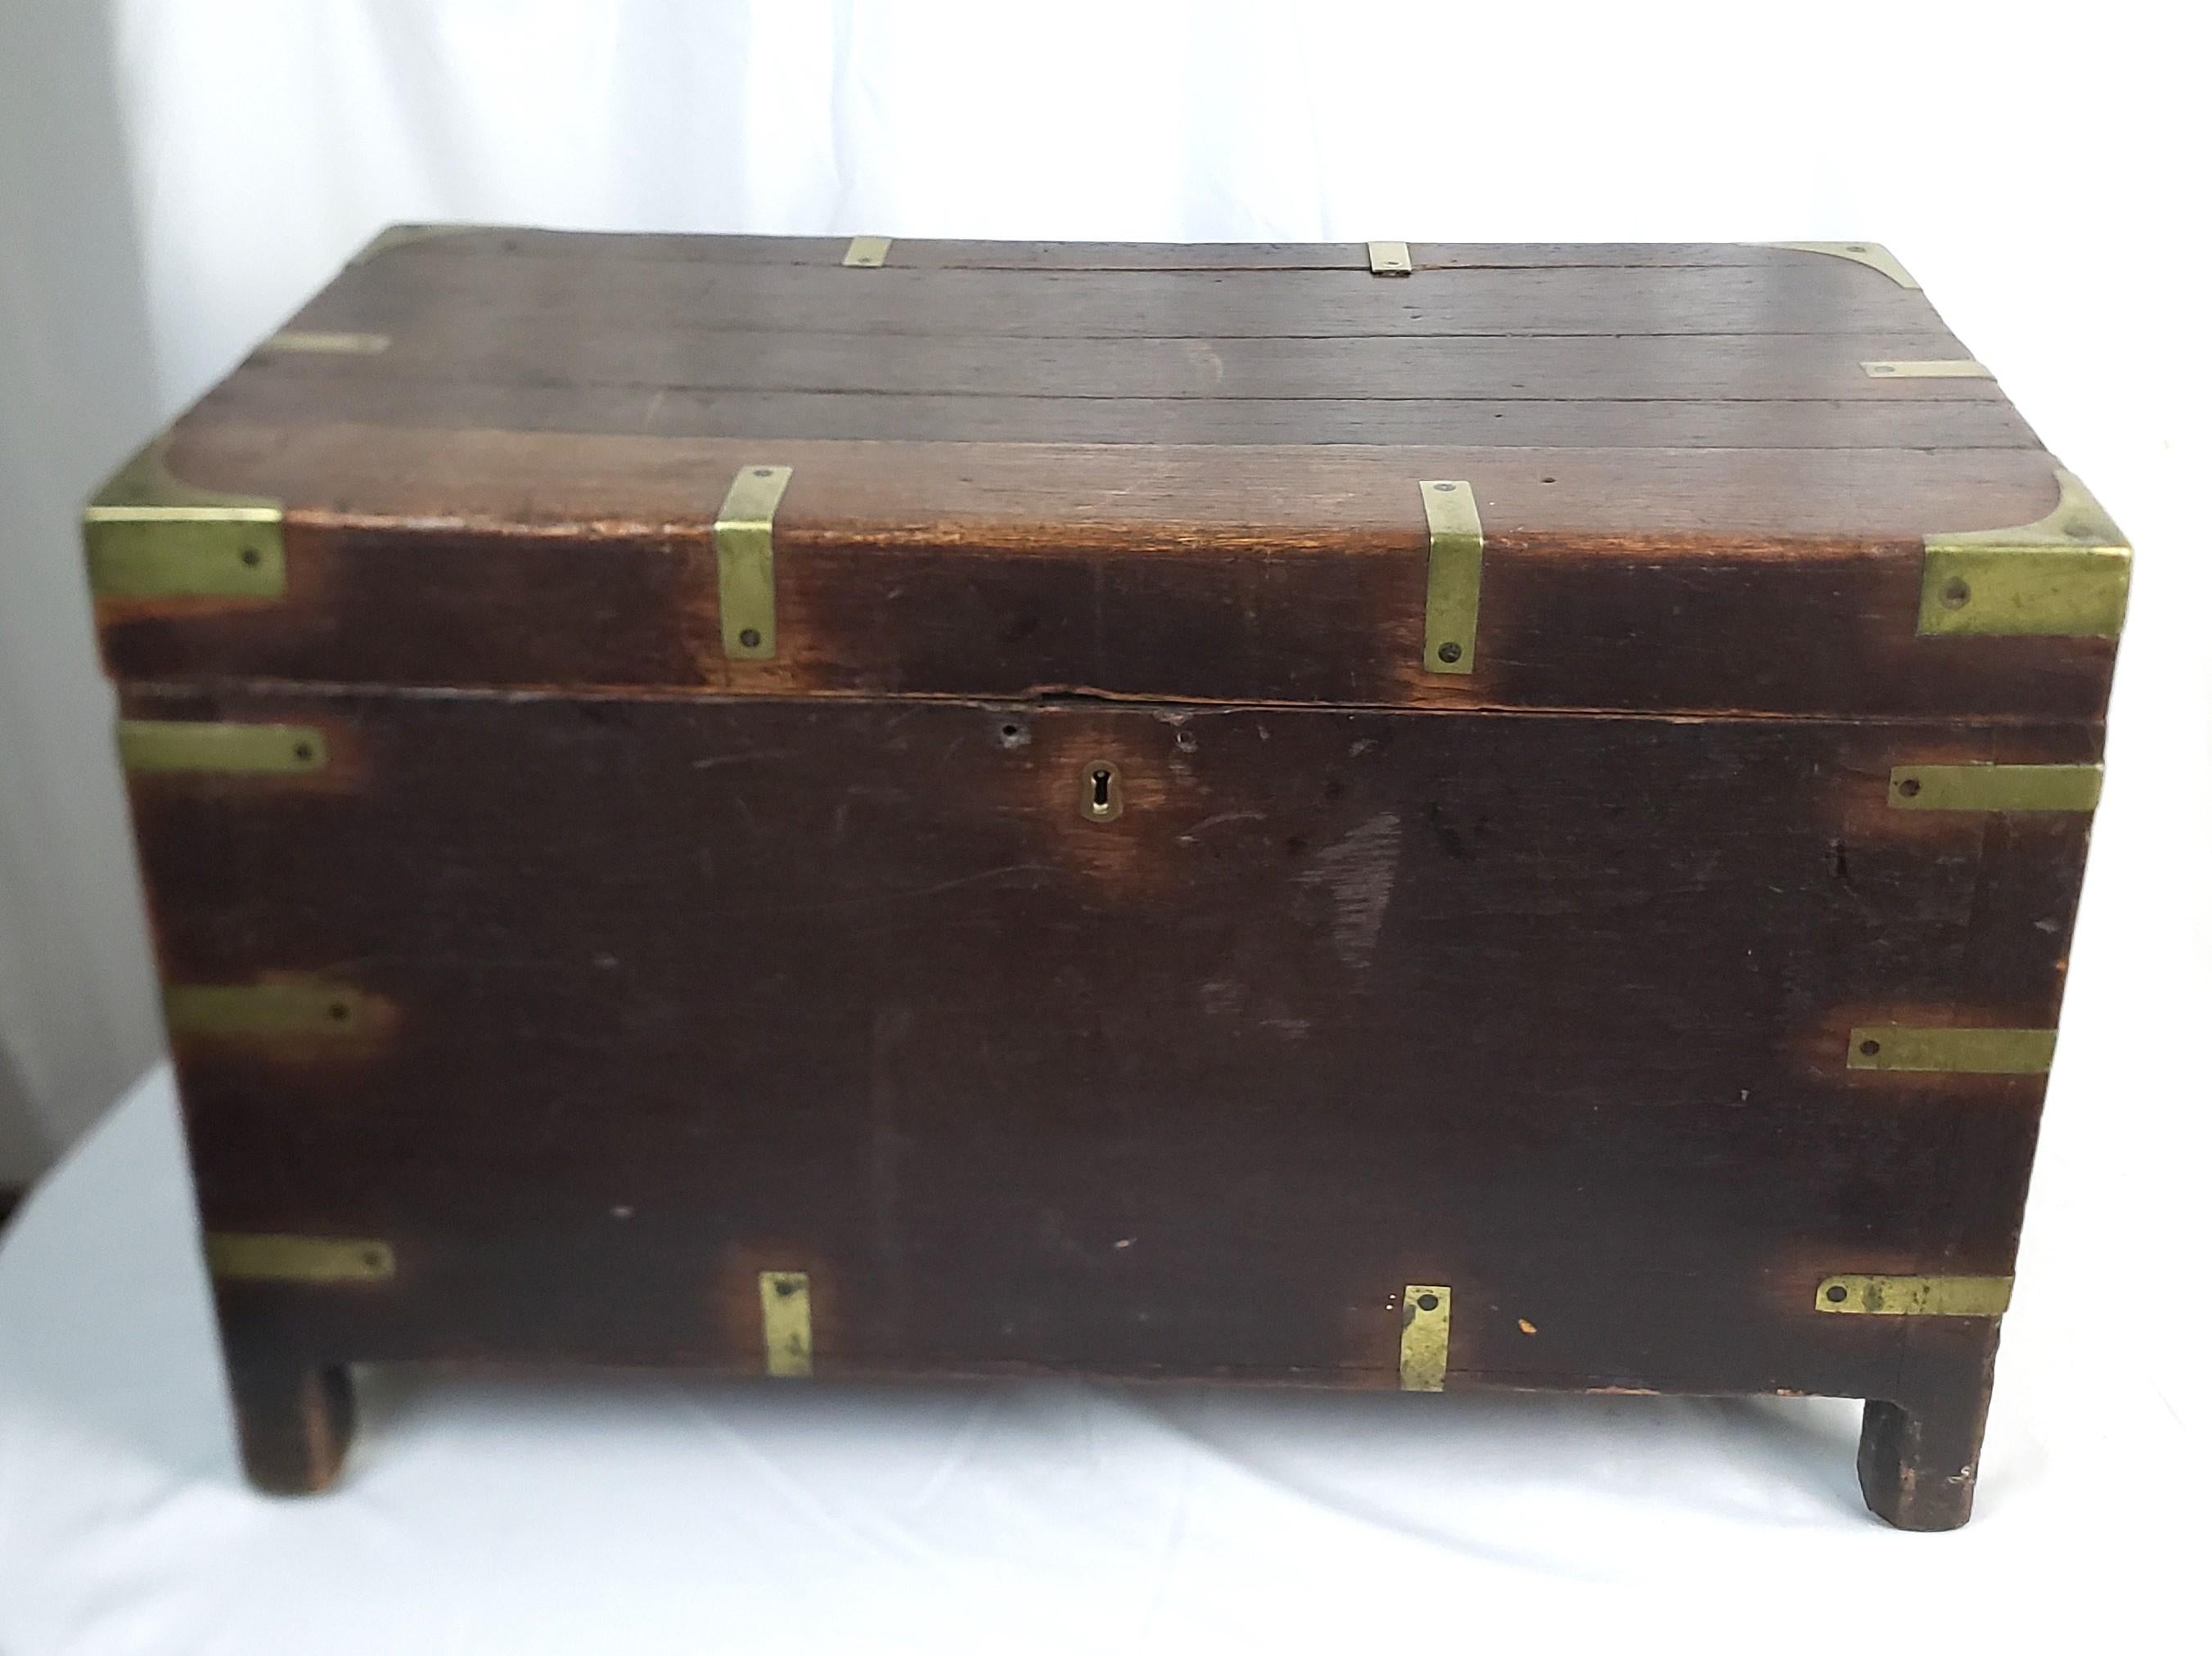 This antique hand-crafted chest is unsigned, but presumed to have originated from England and date to approximately 1785 and done in the period Georgian style. The chest is composed of oak with brass accents around the top and down the sides and